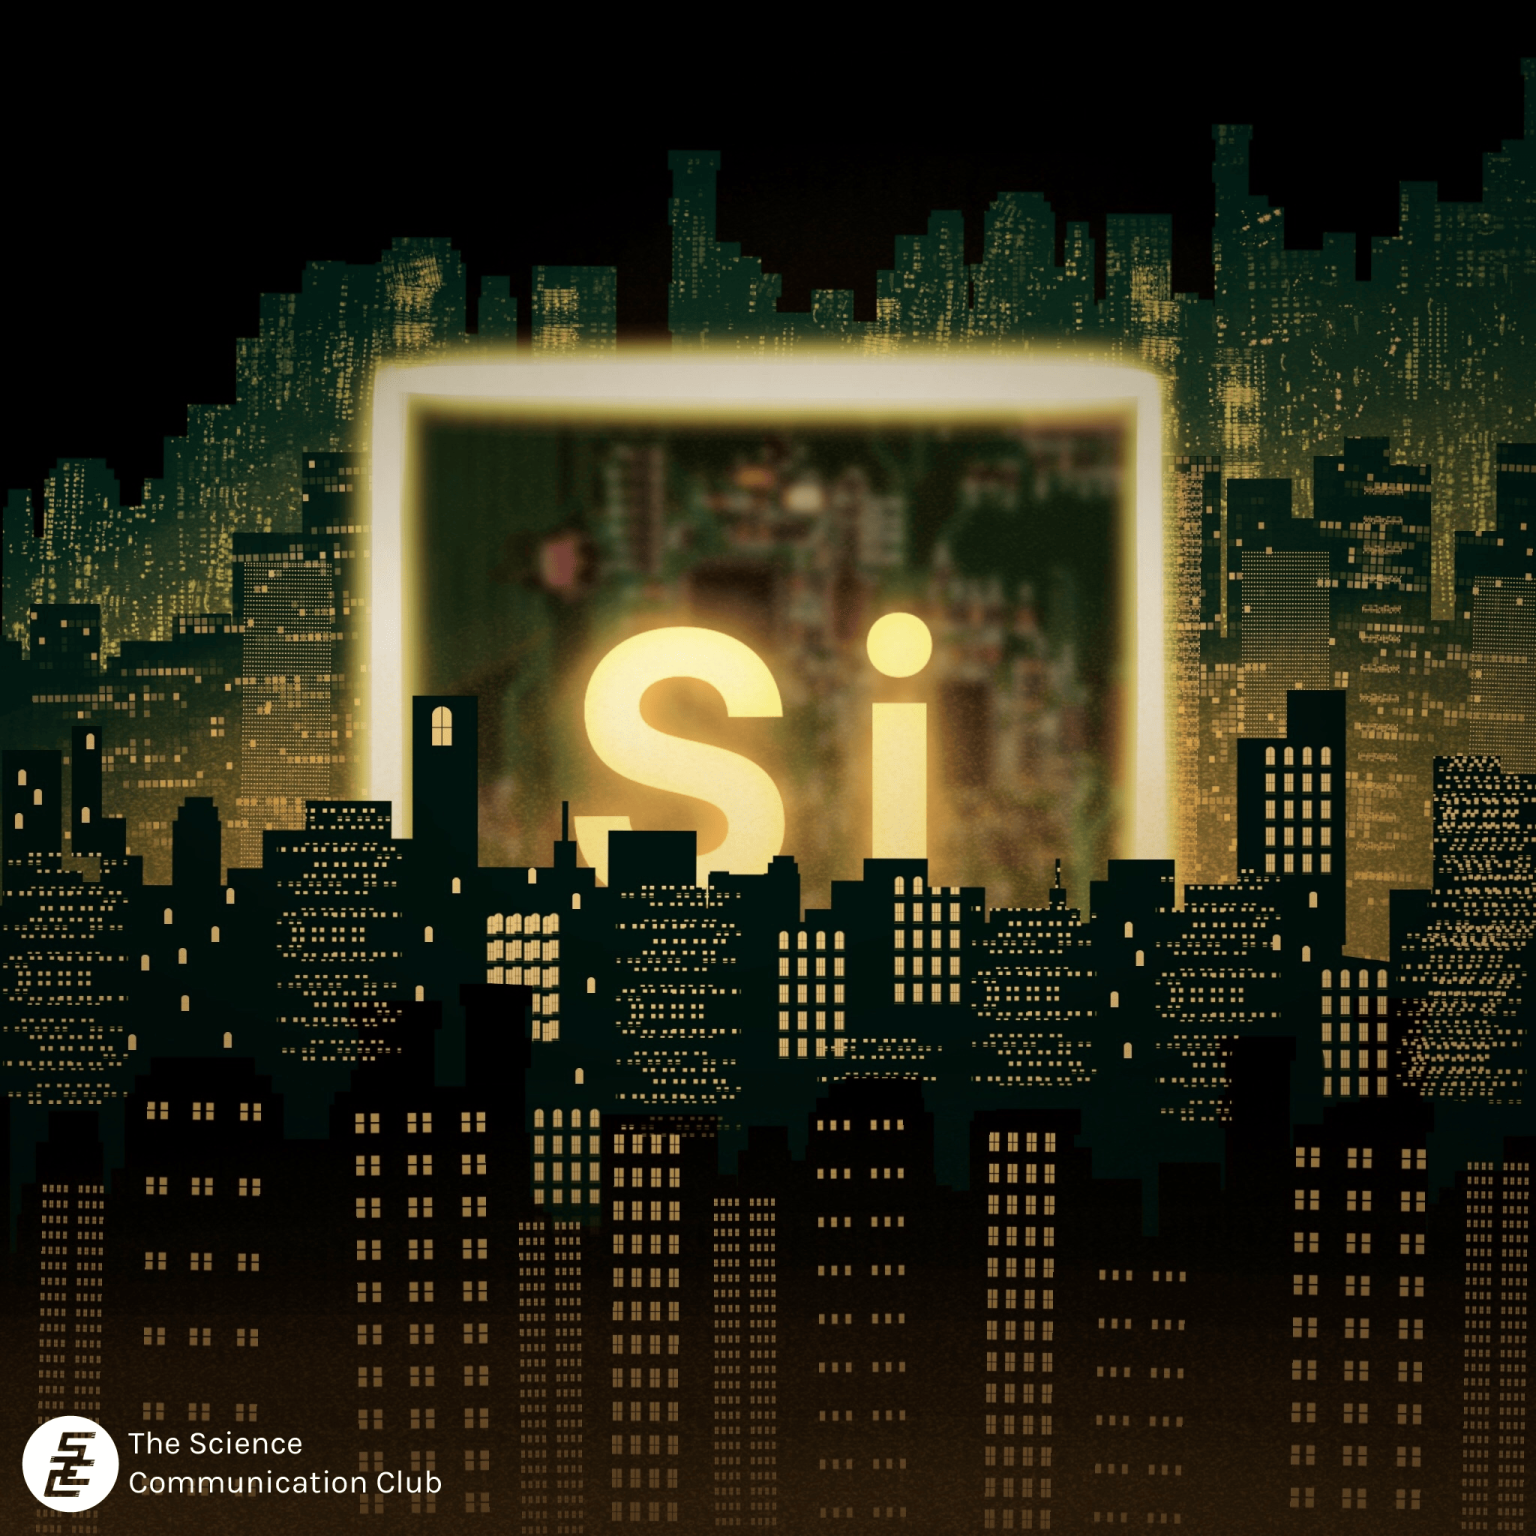 A large square with "Si" written on it to denote silicon is placed in the middle of a large city and illuminates the city surroundings.